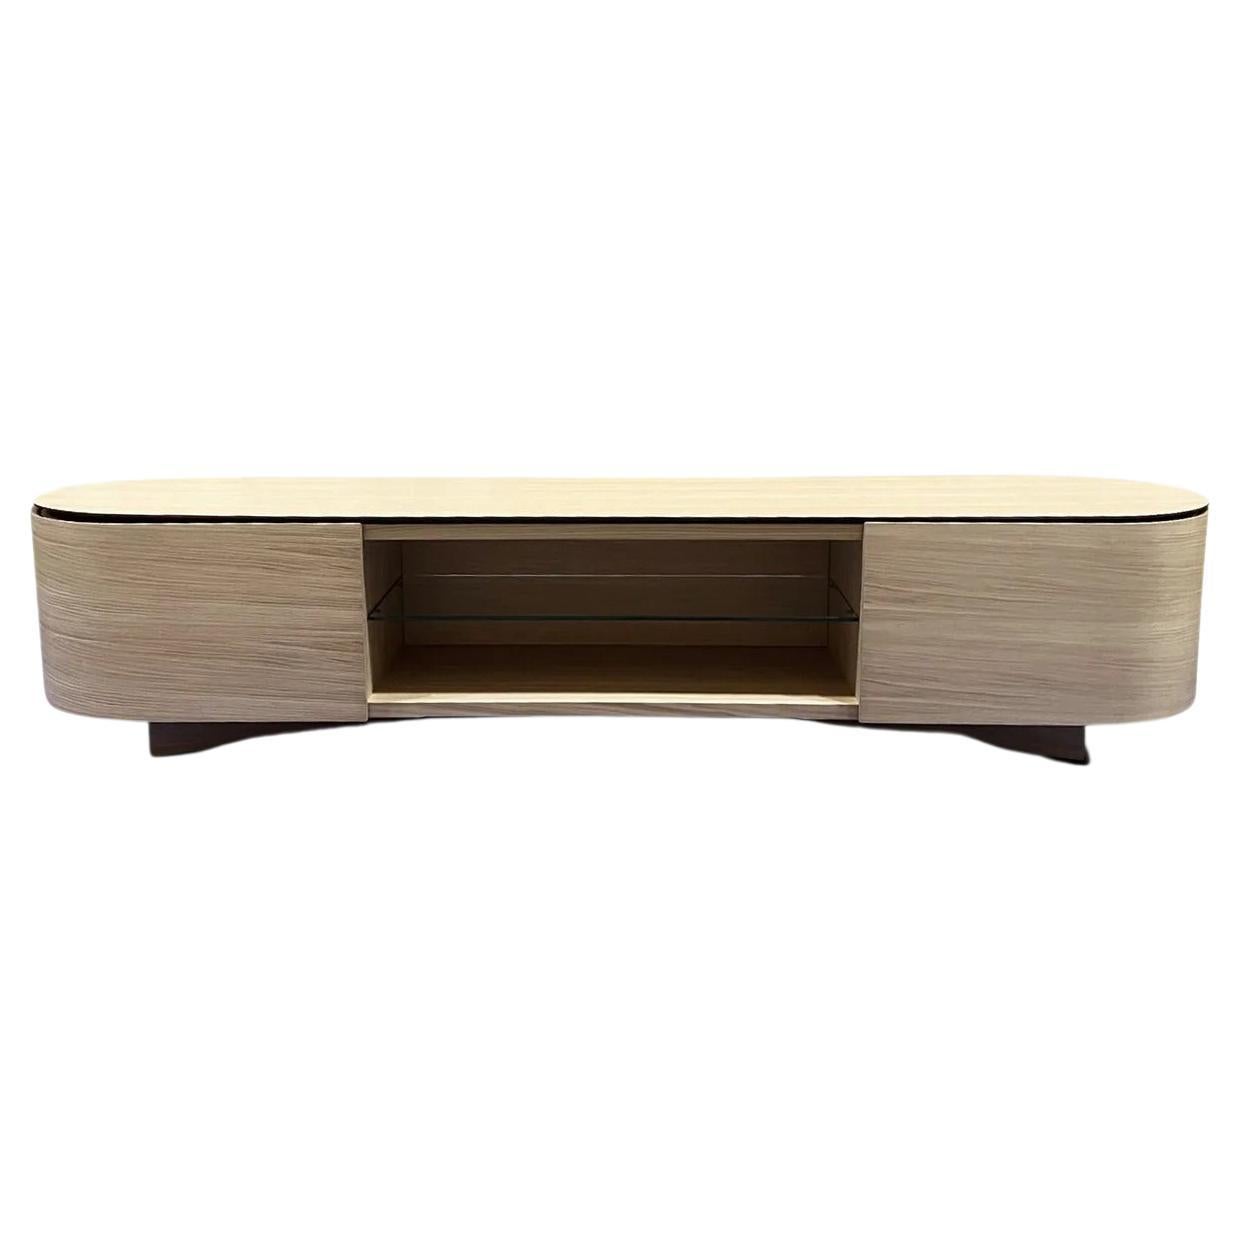 558 Rondos Credenza in Oak- 2 Drawers with Open Compartment